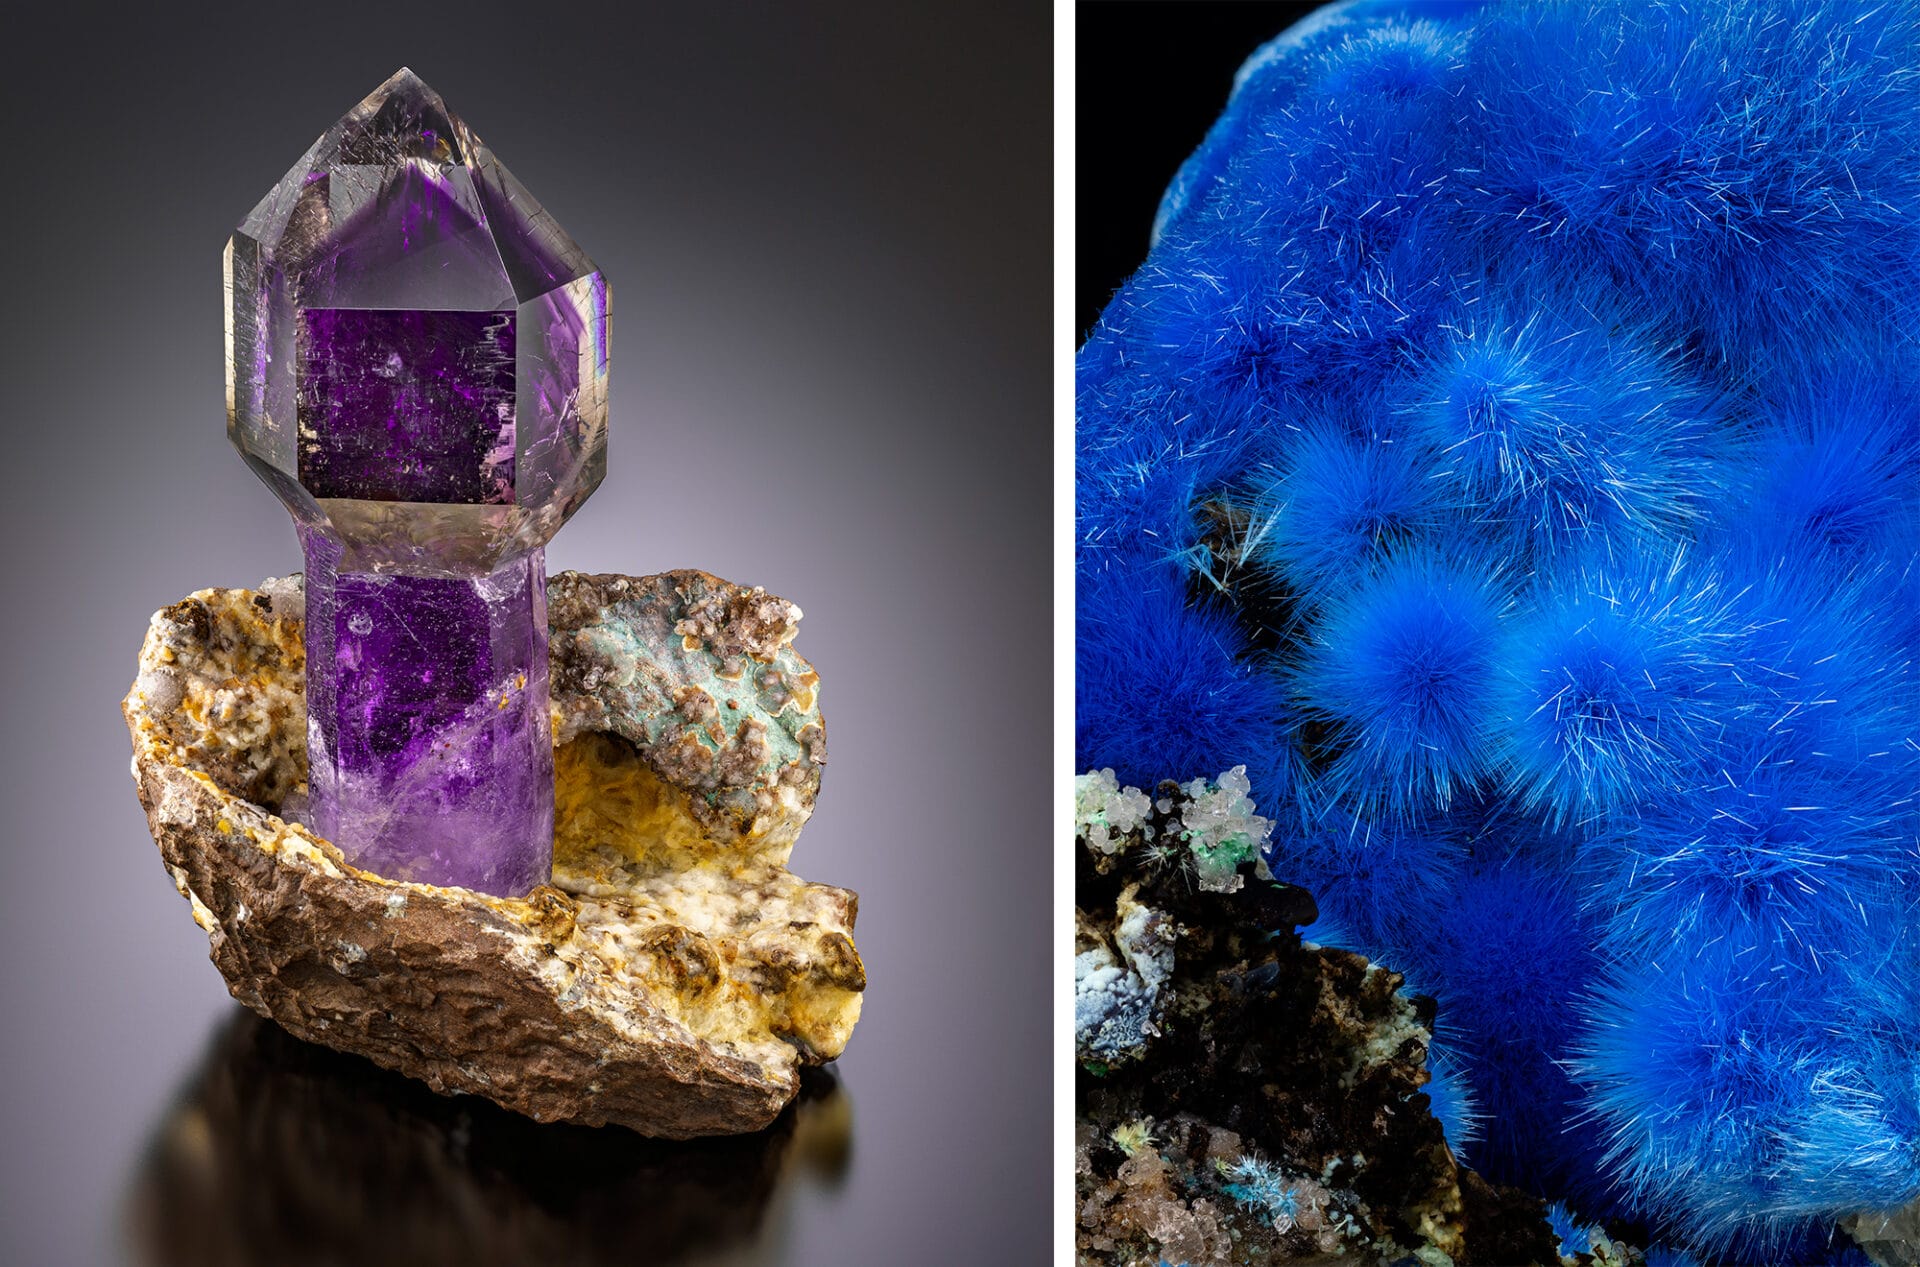 A side-by-side image of two minerals. On the left, amethyst grows out of a golden base. On the right, a detail of a delicate cerulean blue mineral that looks fuzzy.